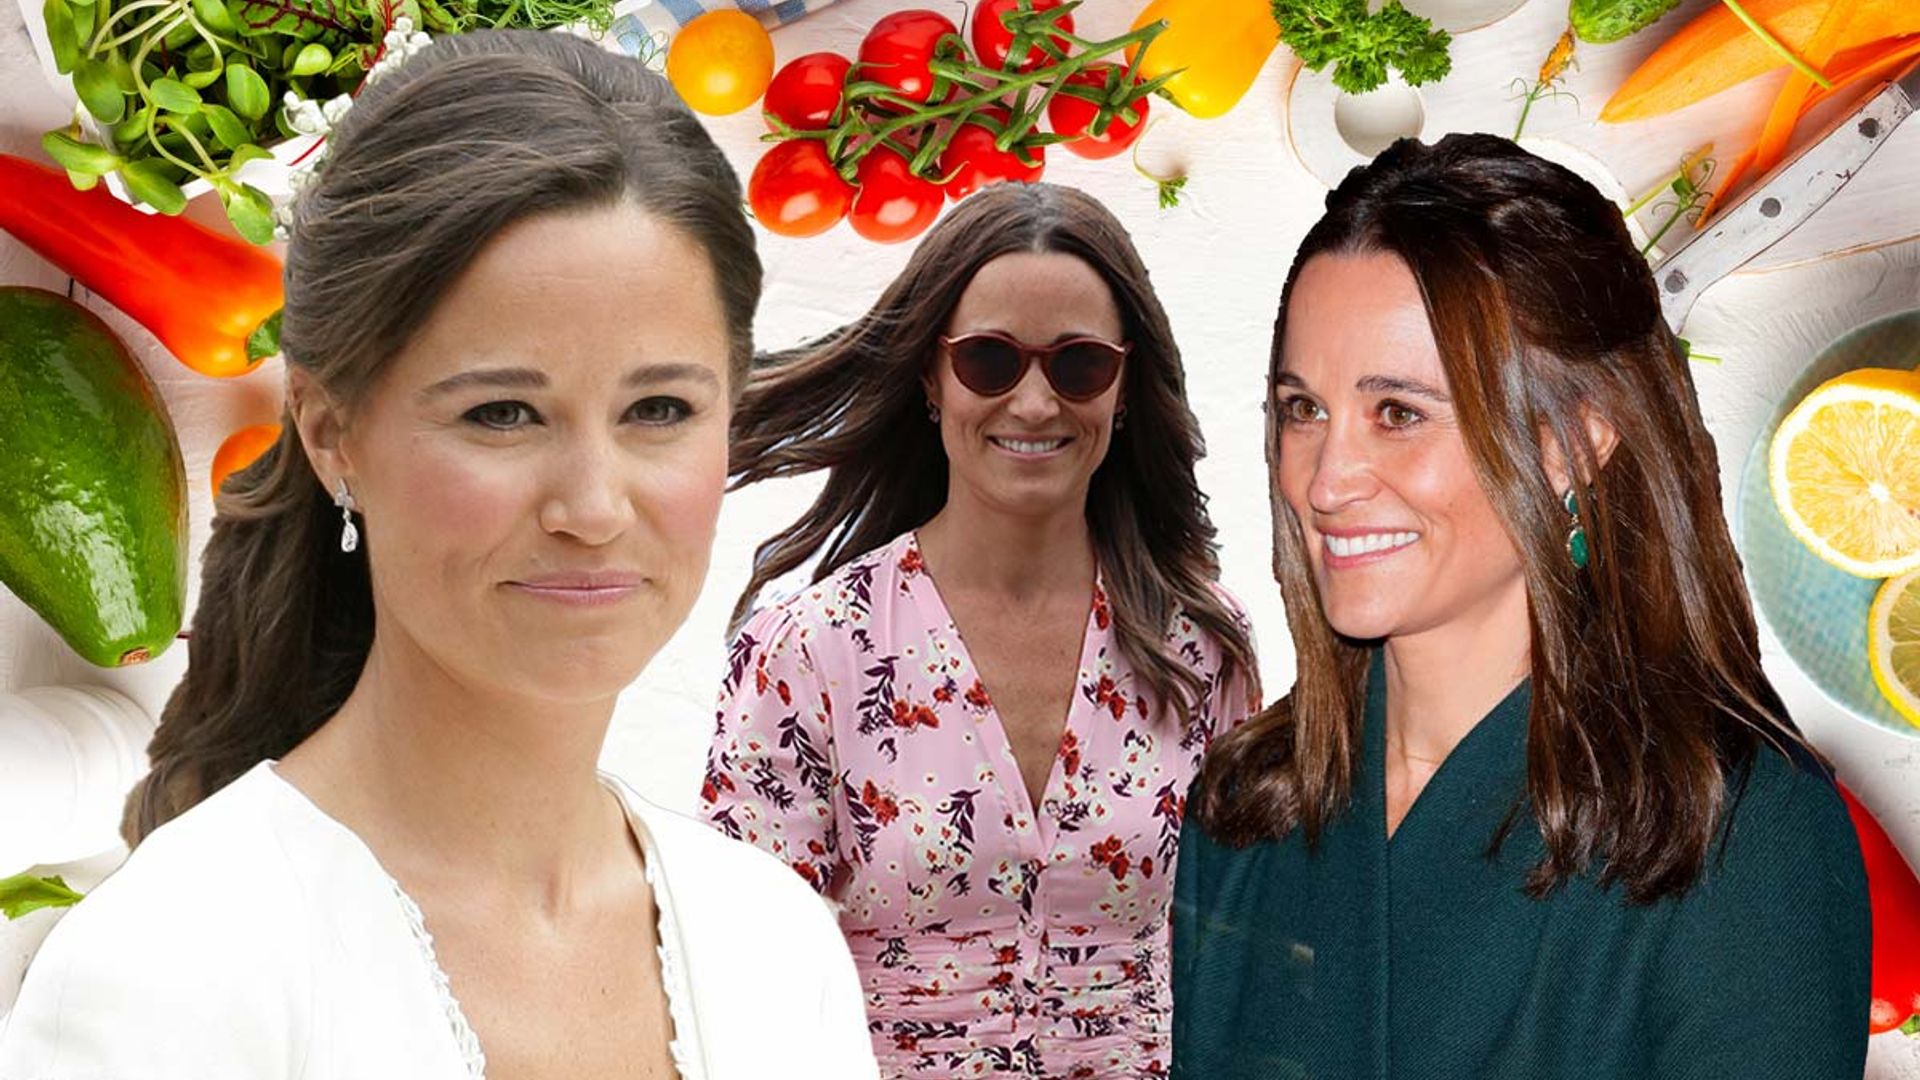 Pippa Middleton's daily diet: The healthy mum's typical day on a plate to get her glow